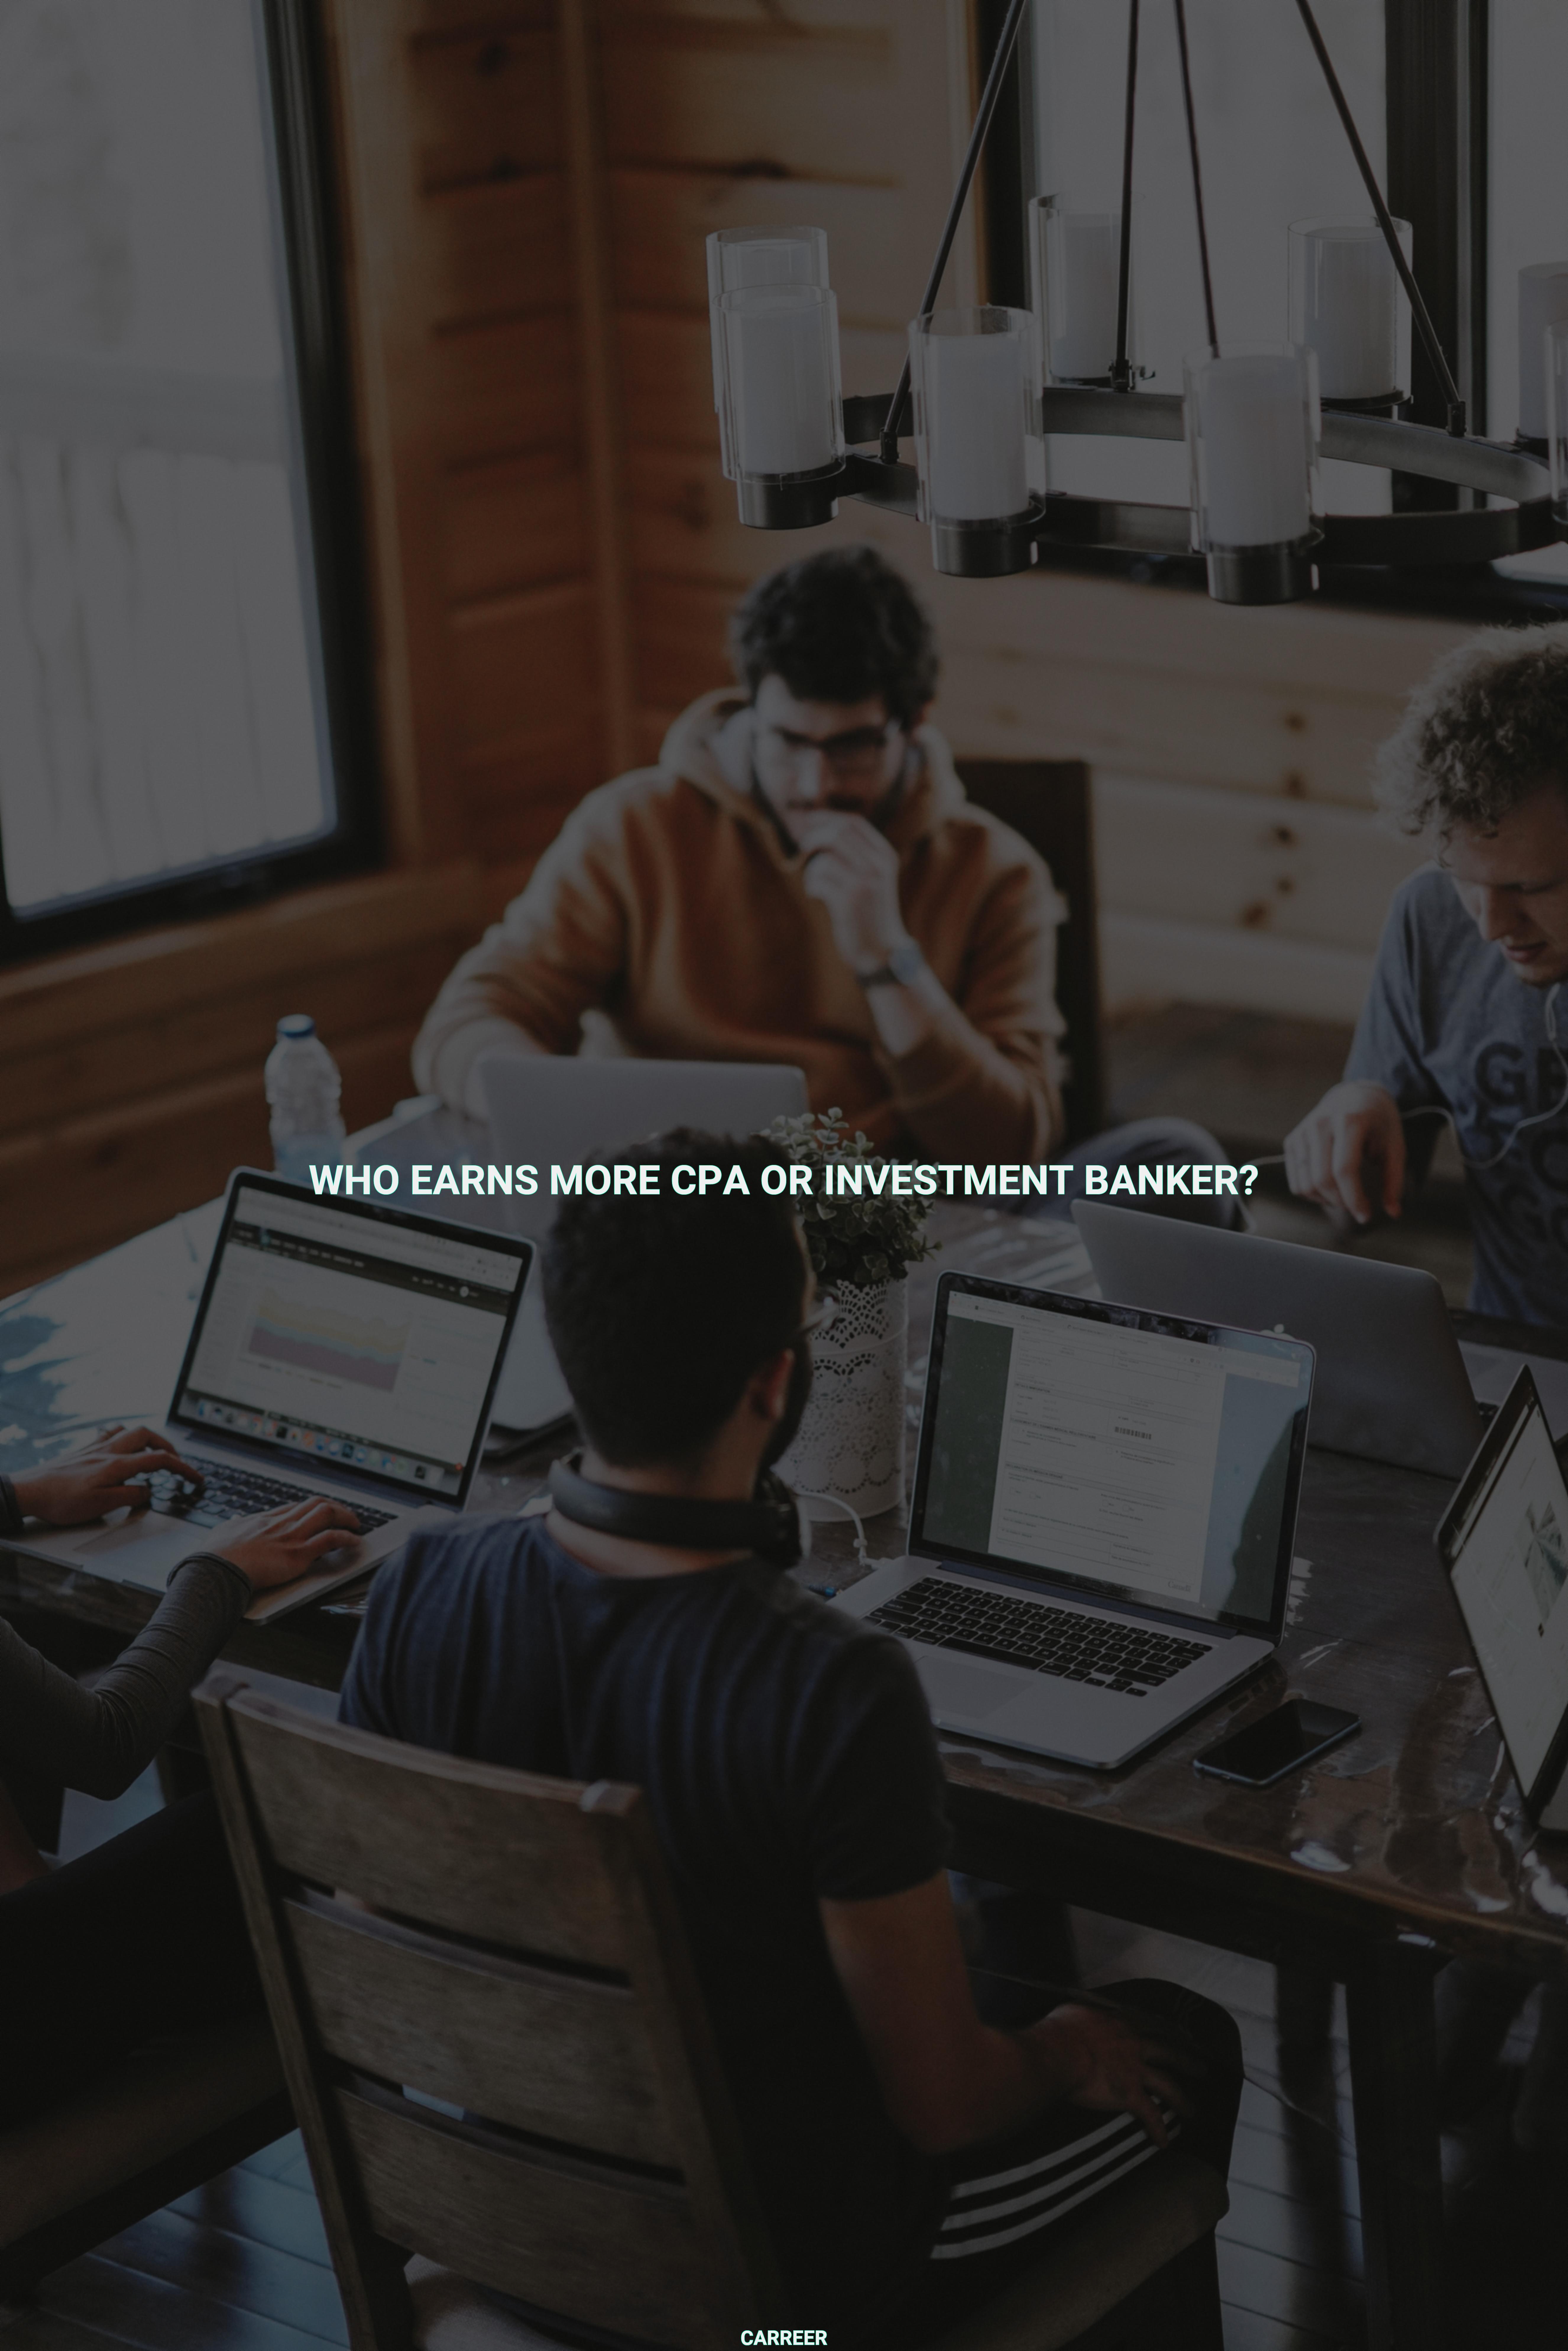 Who earns more cpa or investment banker?